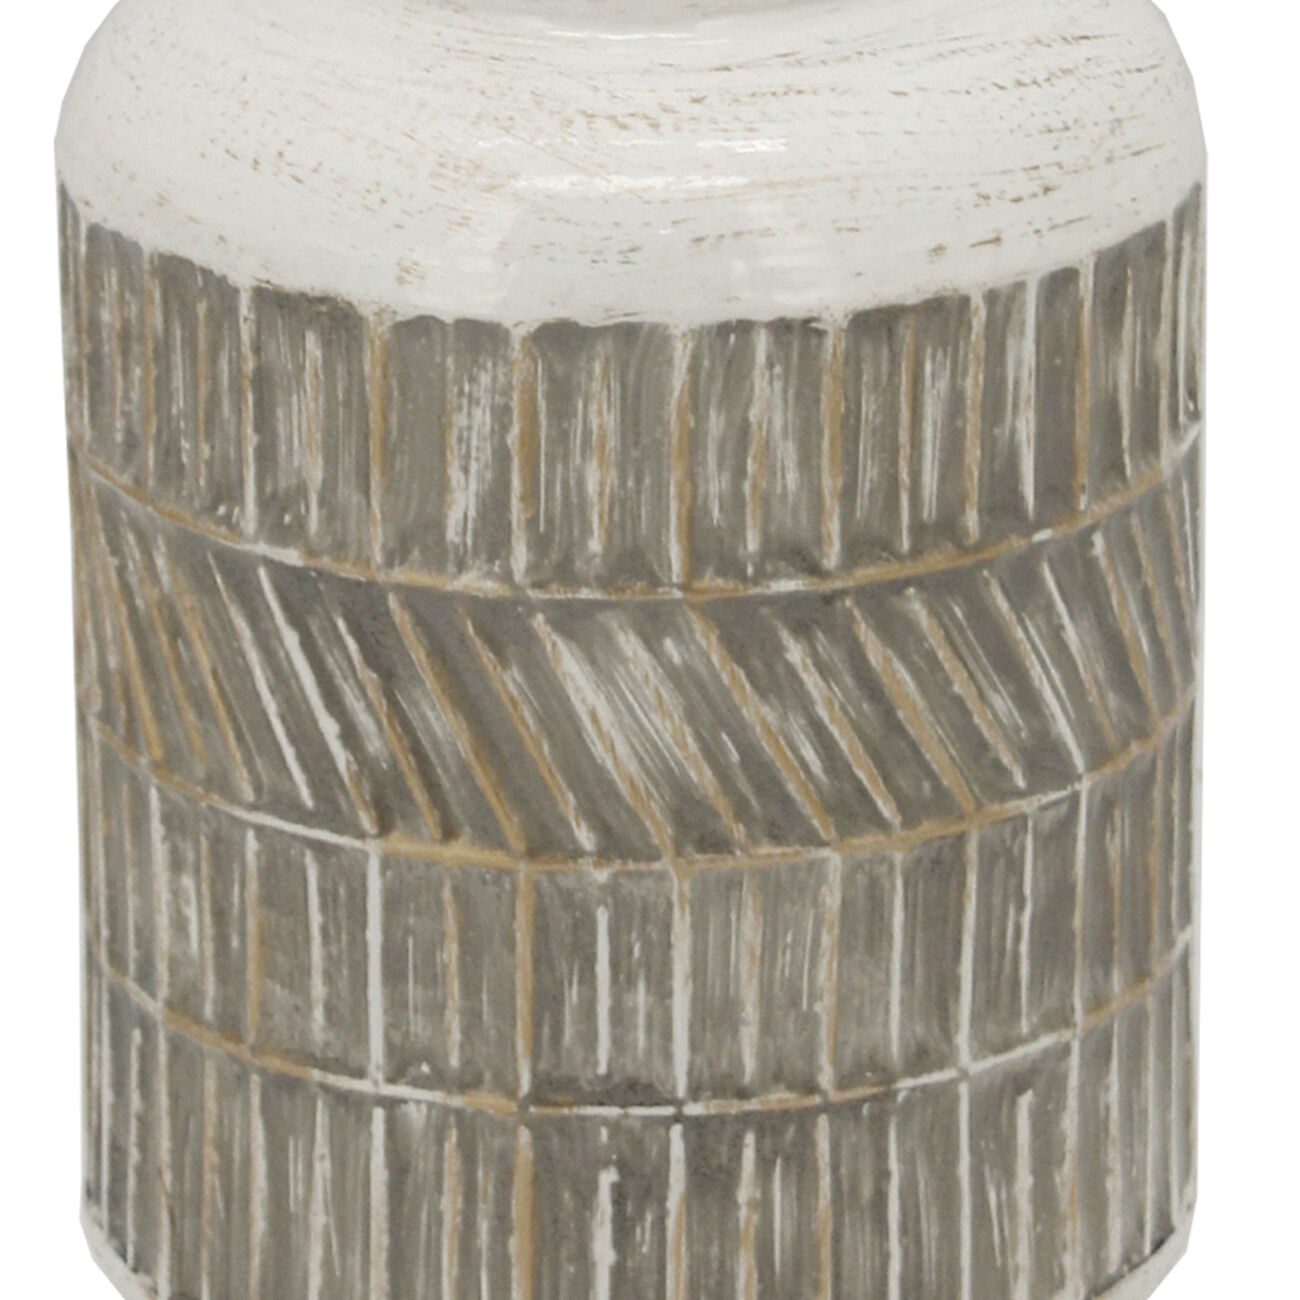 10 Inch Milk Jar Design Accent Decor with Tapered Bottom Base, Gray